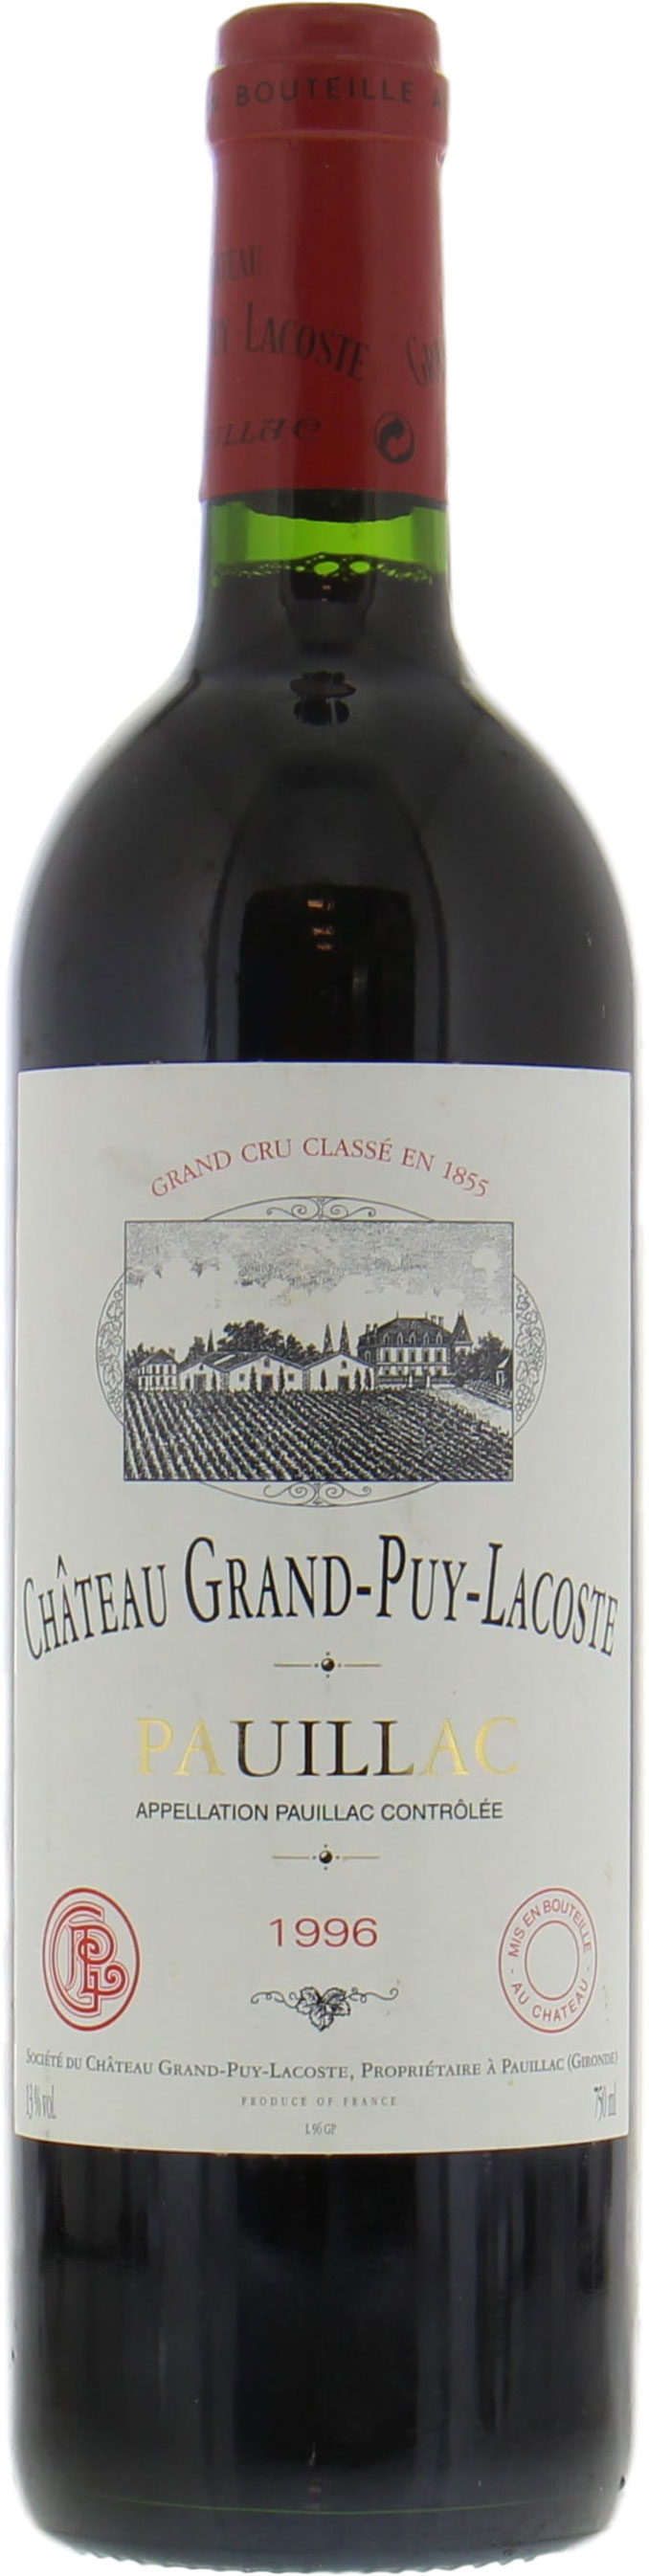 Chateau Grand Puy Lacoste - Chateau Grand Puy Lacoste 1996 Perfect